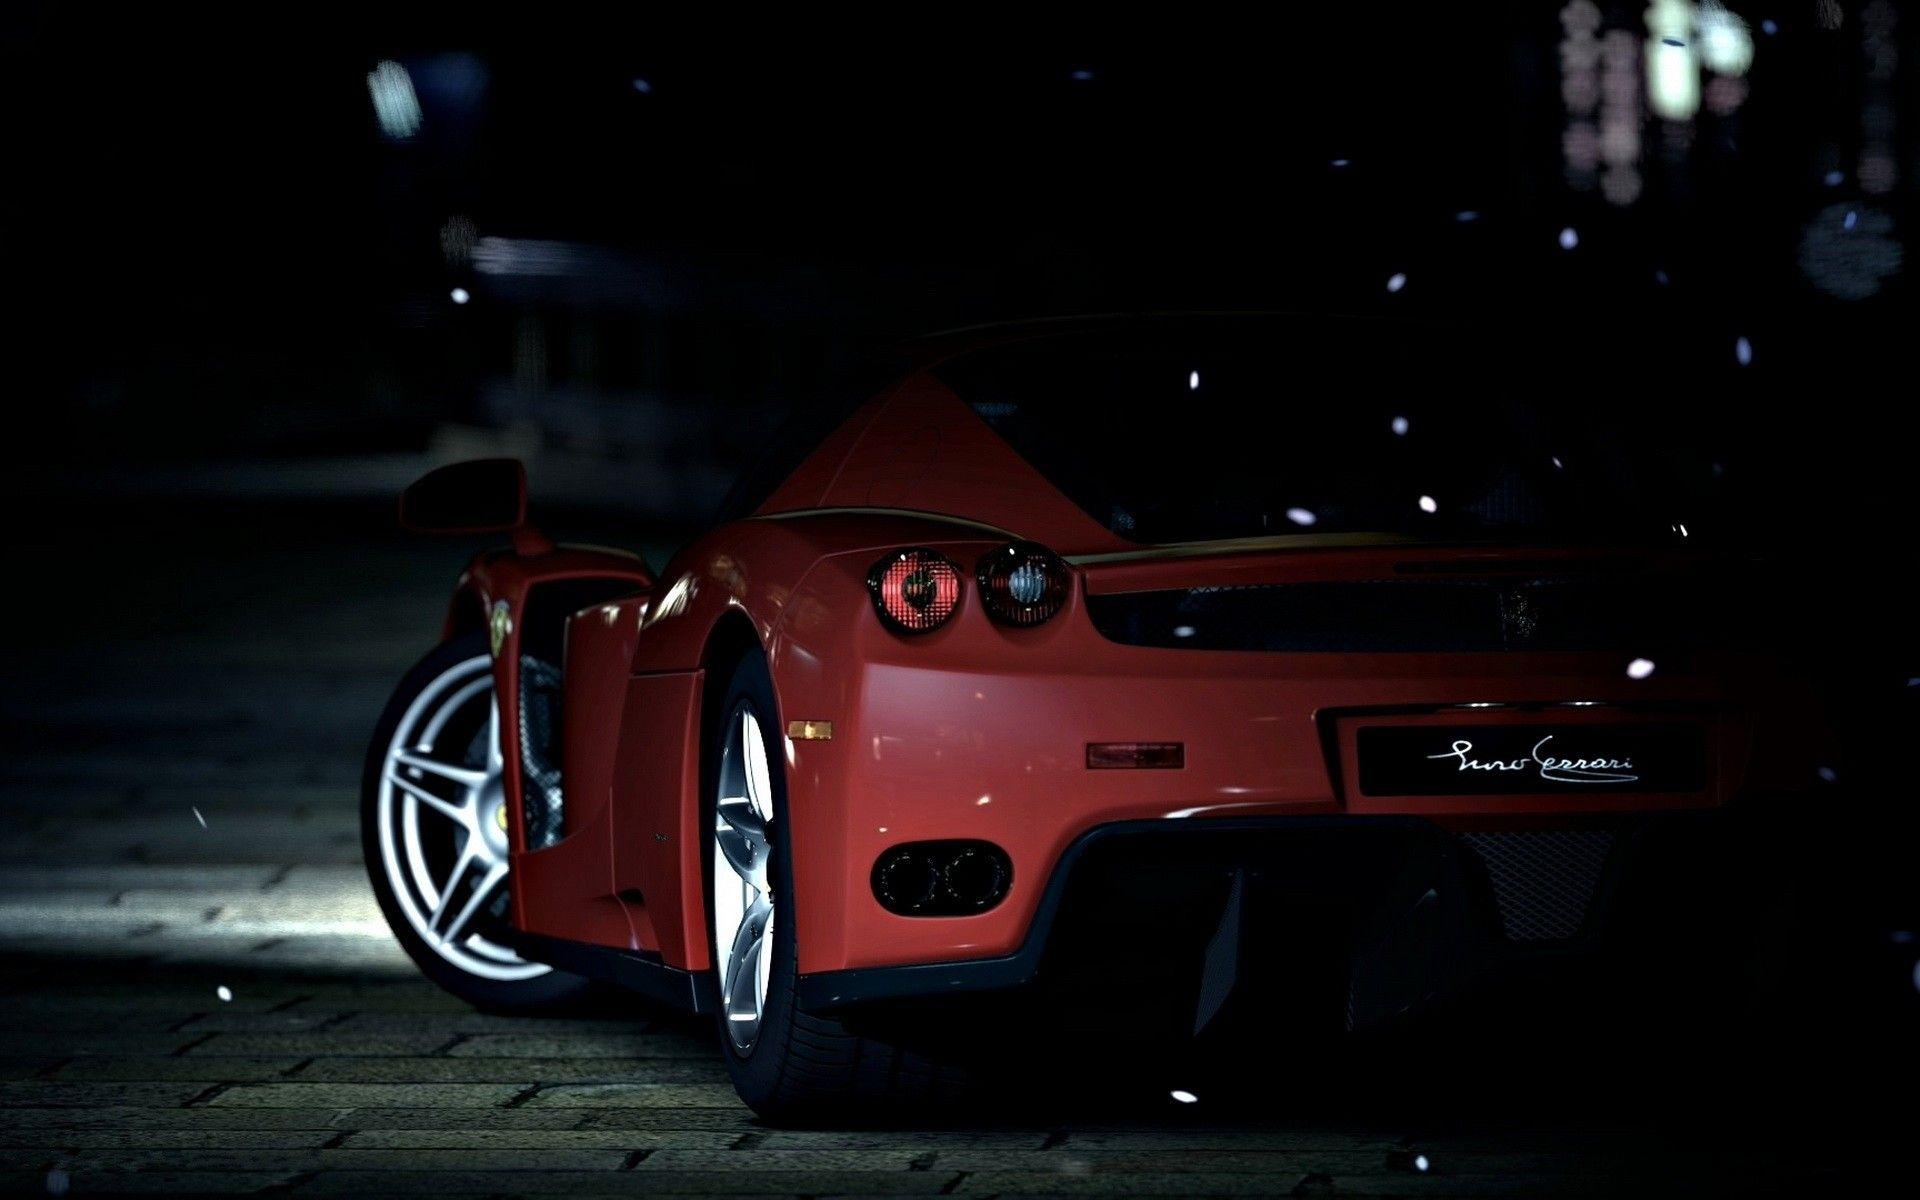 Red sports car on a dark street wallpaper and image